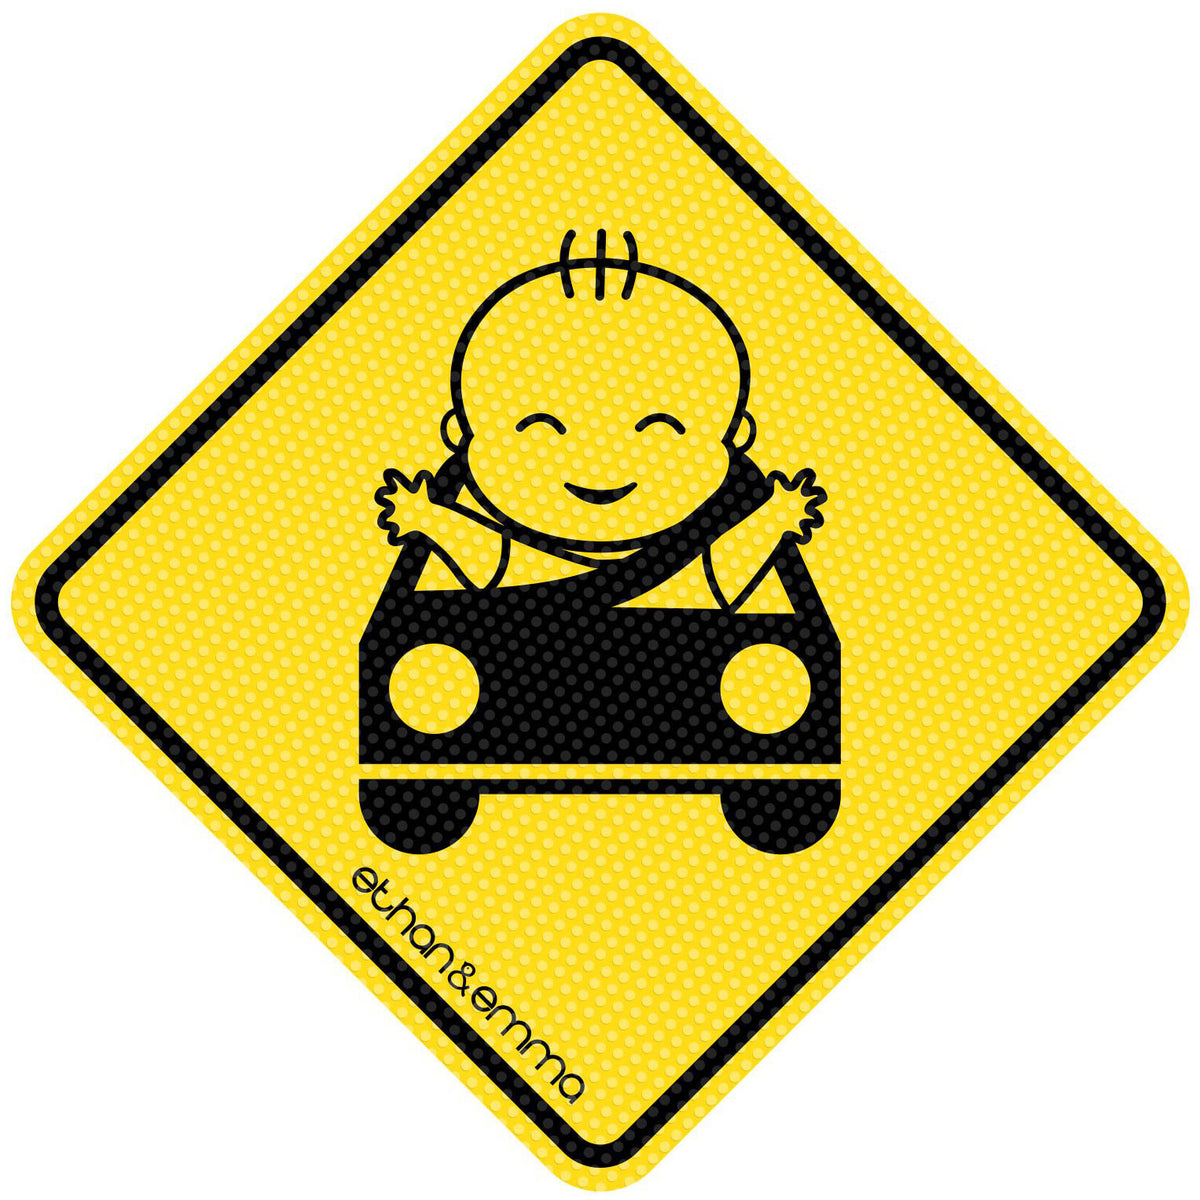 Baby on Board Decal Cute Baby in Car Stickers Peel and Stick